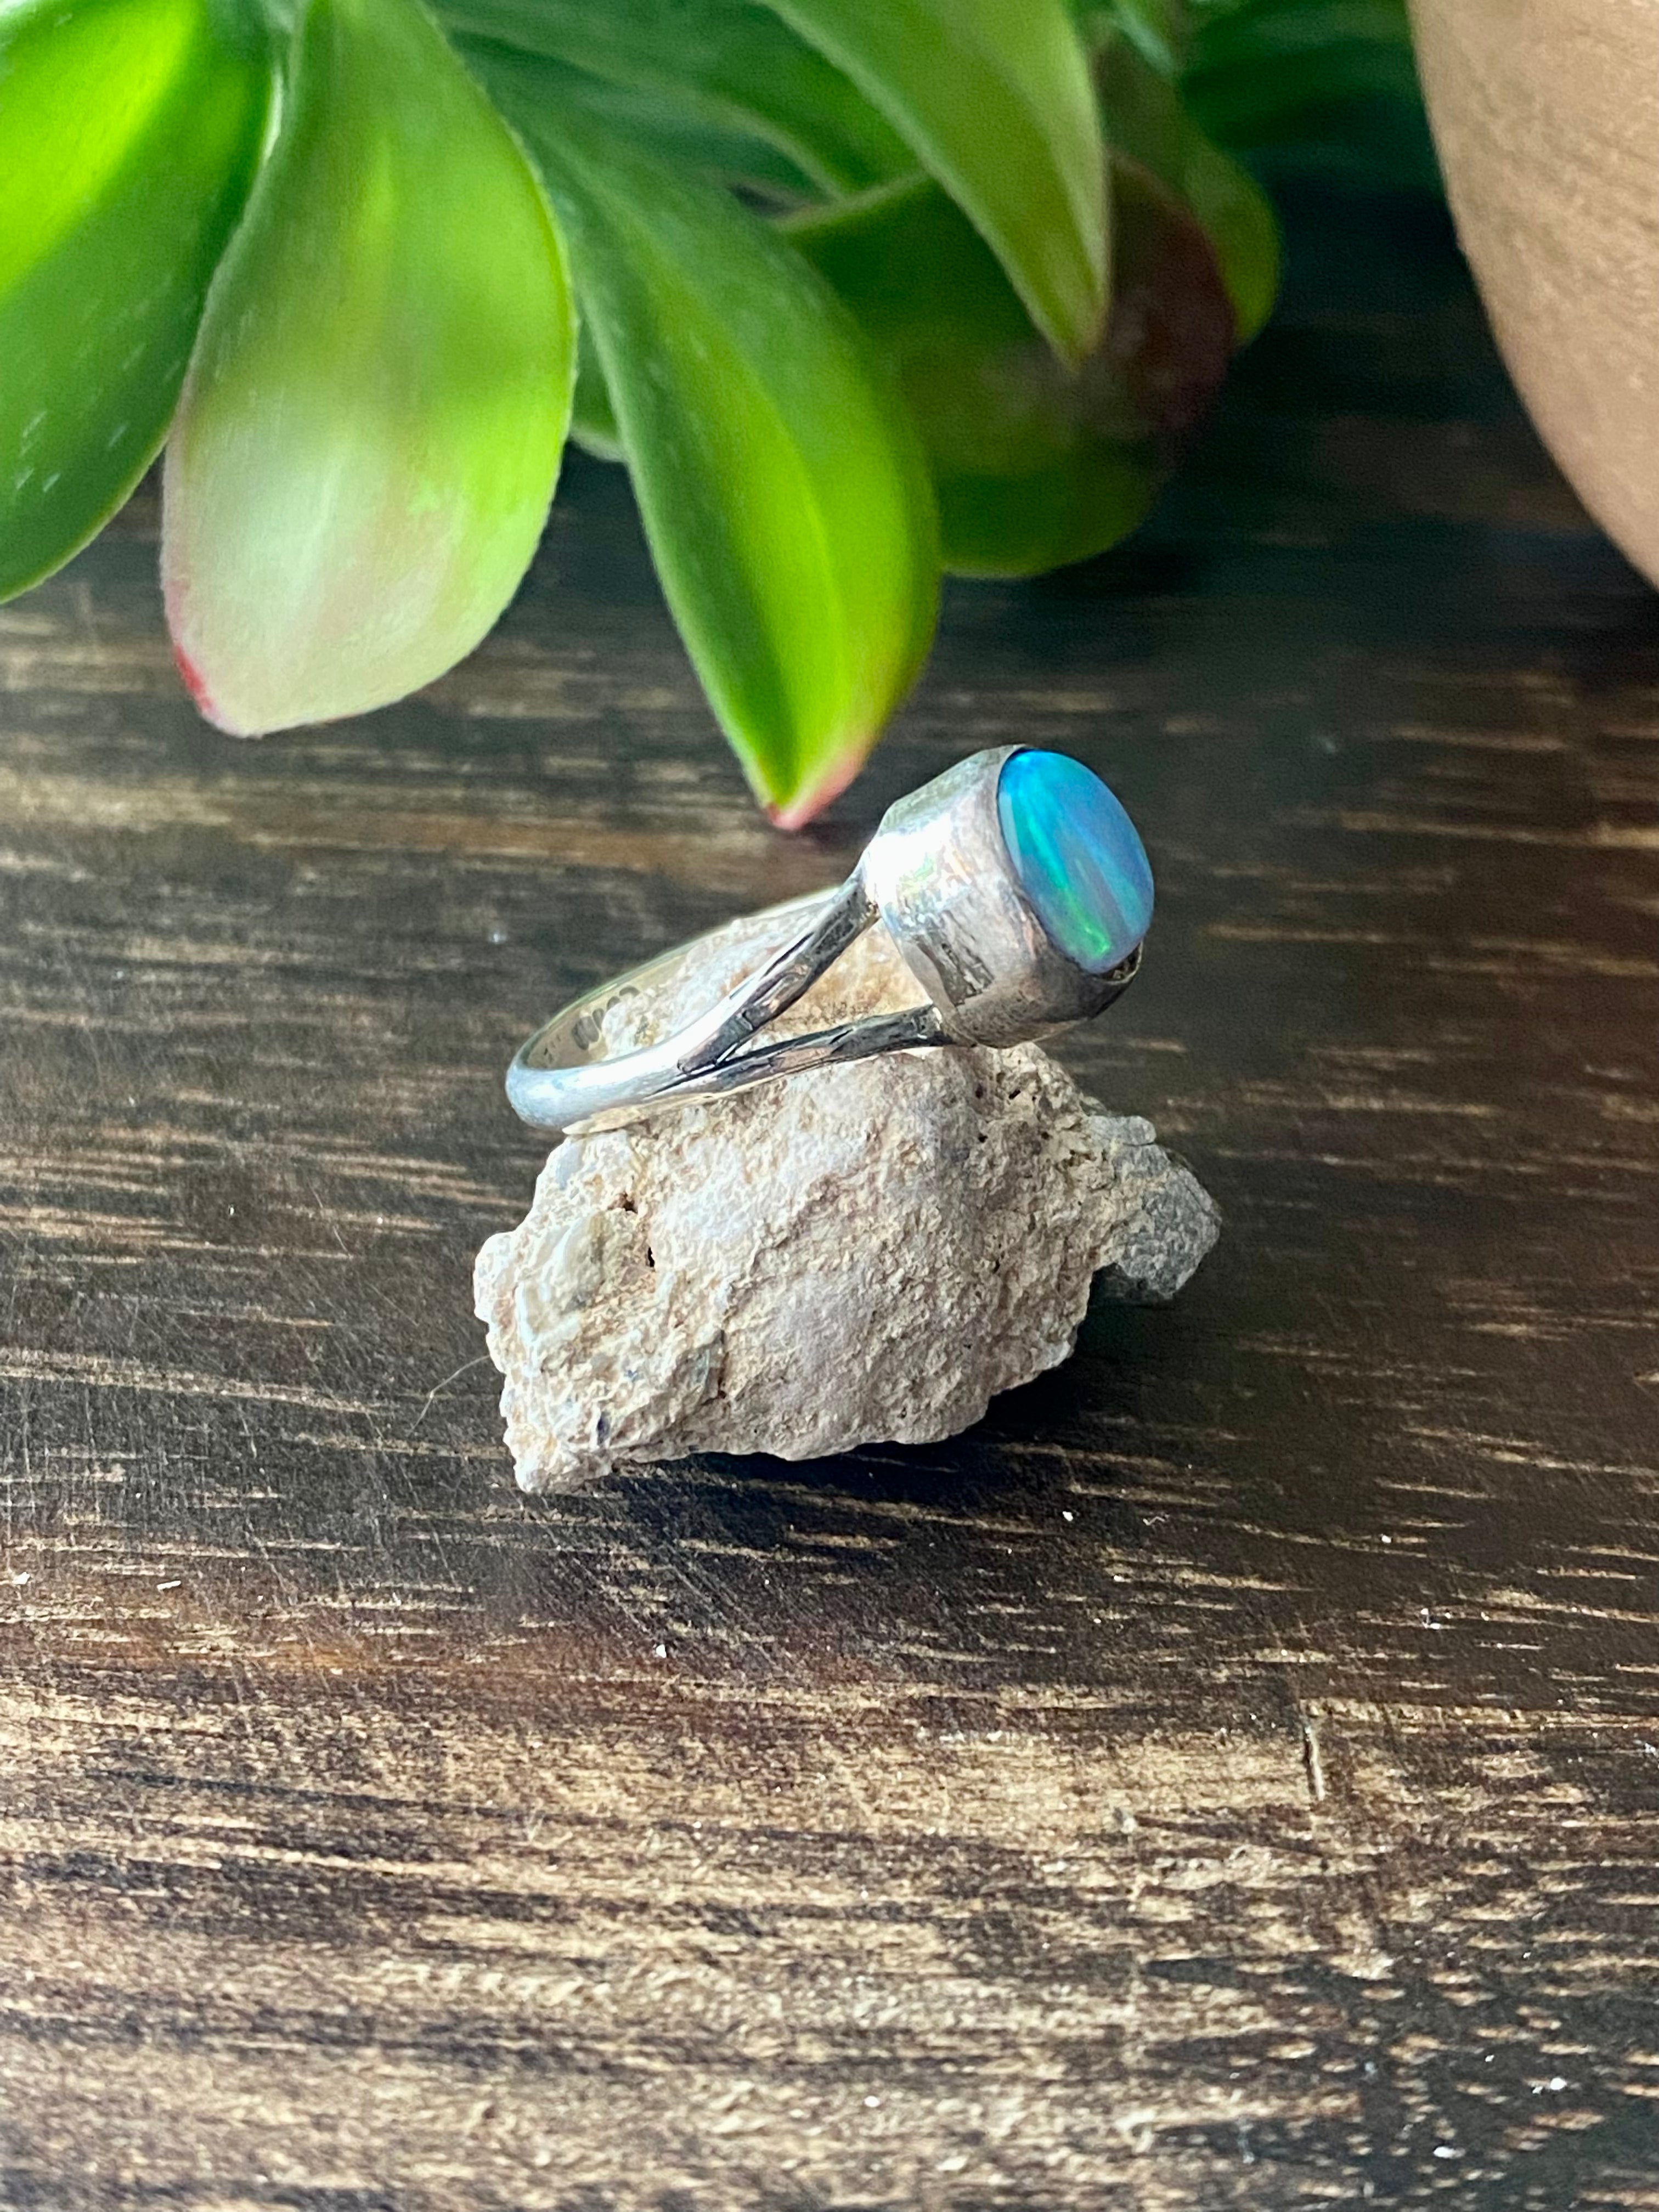 Navajo Made Blue Opal & Sterling Silver Ring Size 5.25